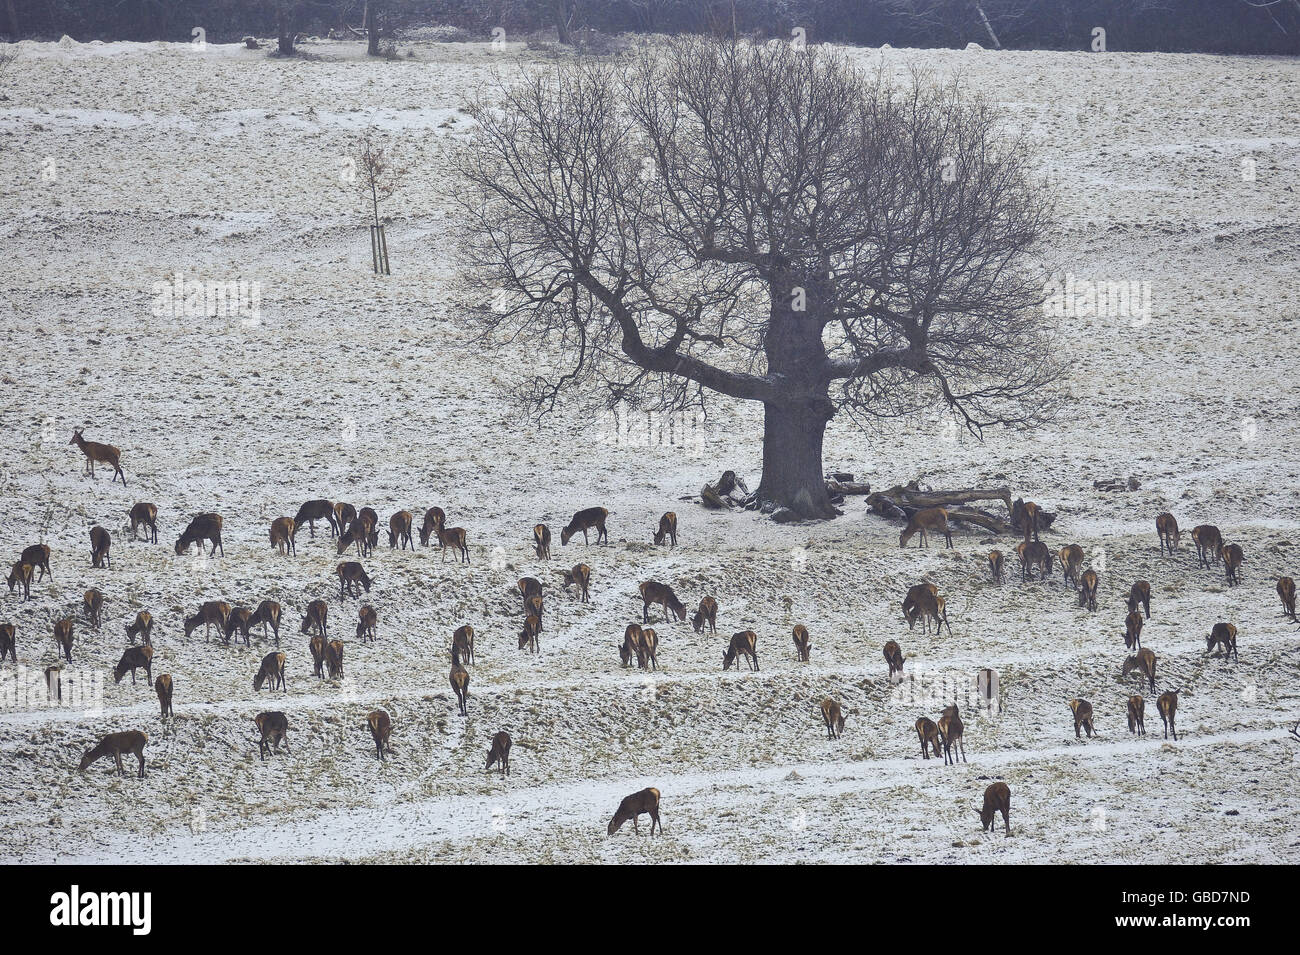 Deer on the Ashton Court Estate, Bristol, carry on as usual in the heavy snowfall that has now reached the South West of the United Kingdom. Stock Photo